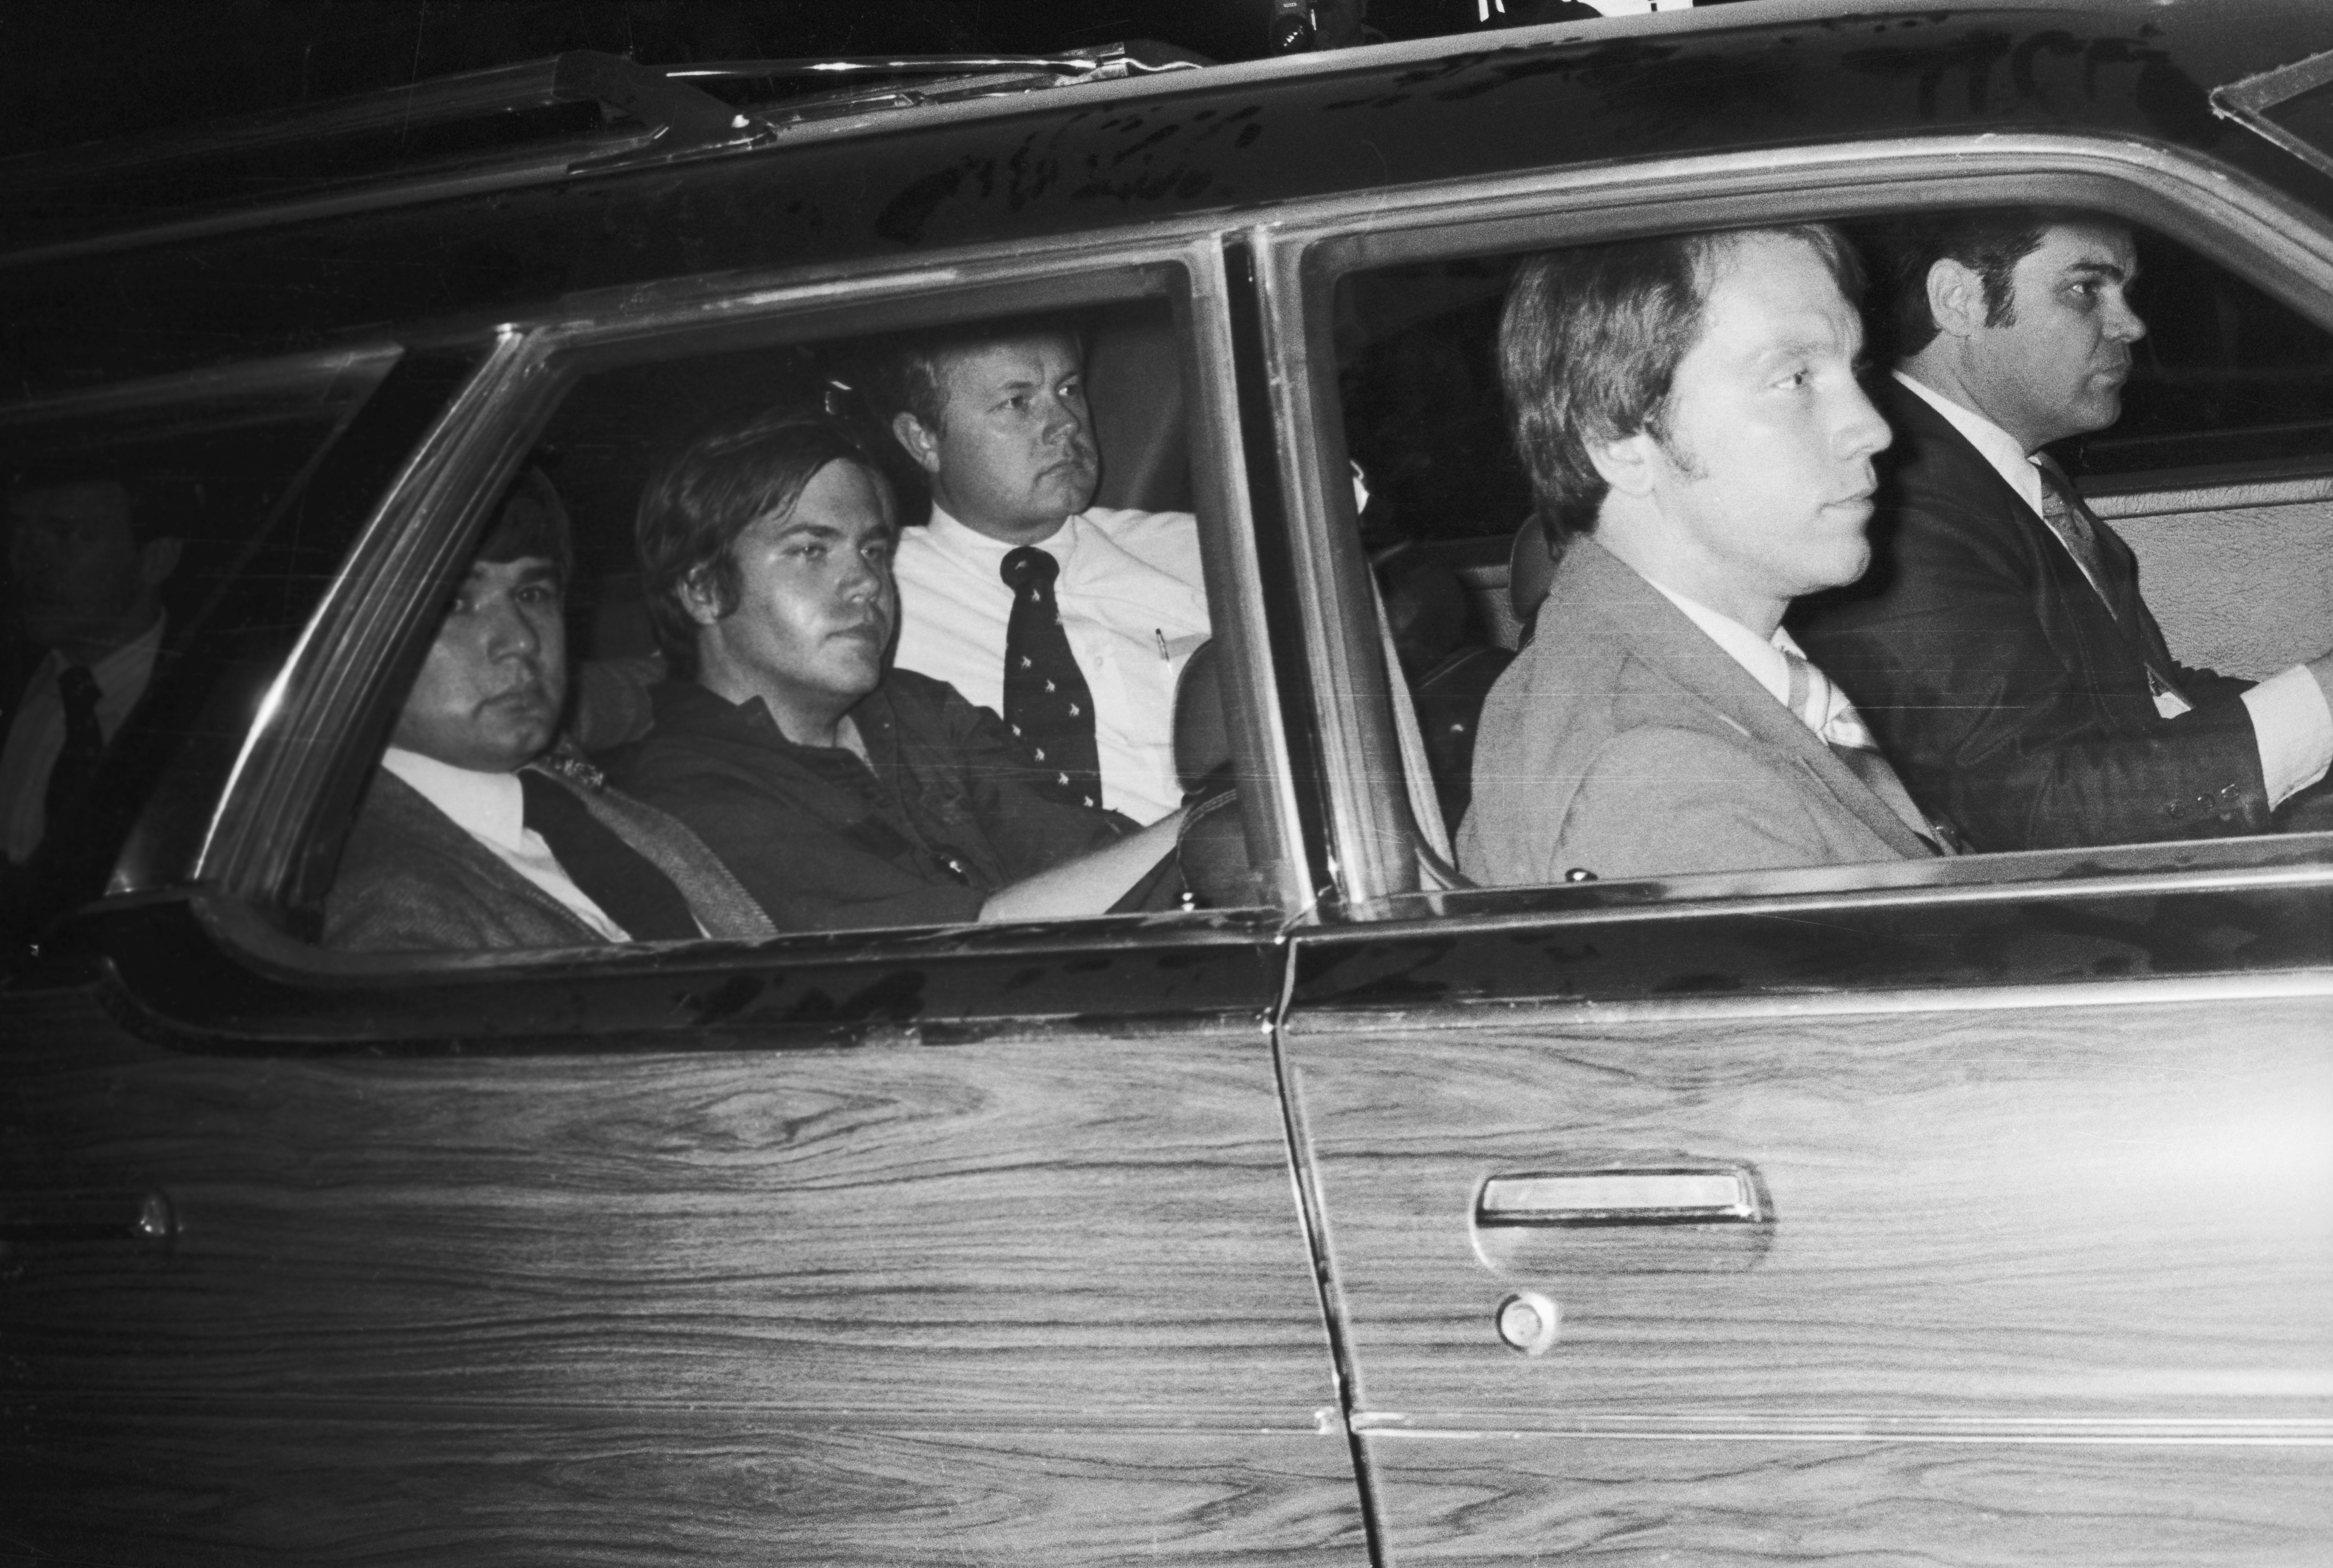 John Hinckley, Who Attempted To Assassinate President Reagan, Gets Unconditional Release